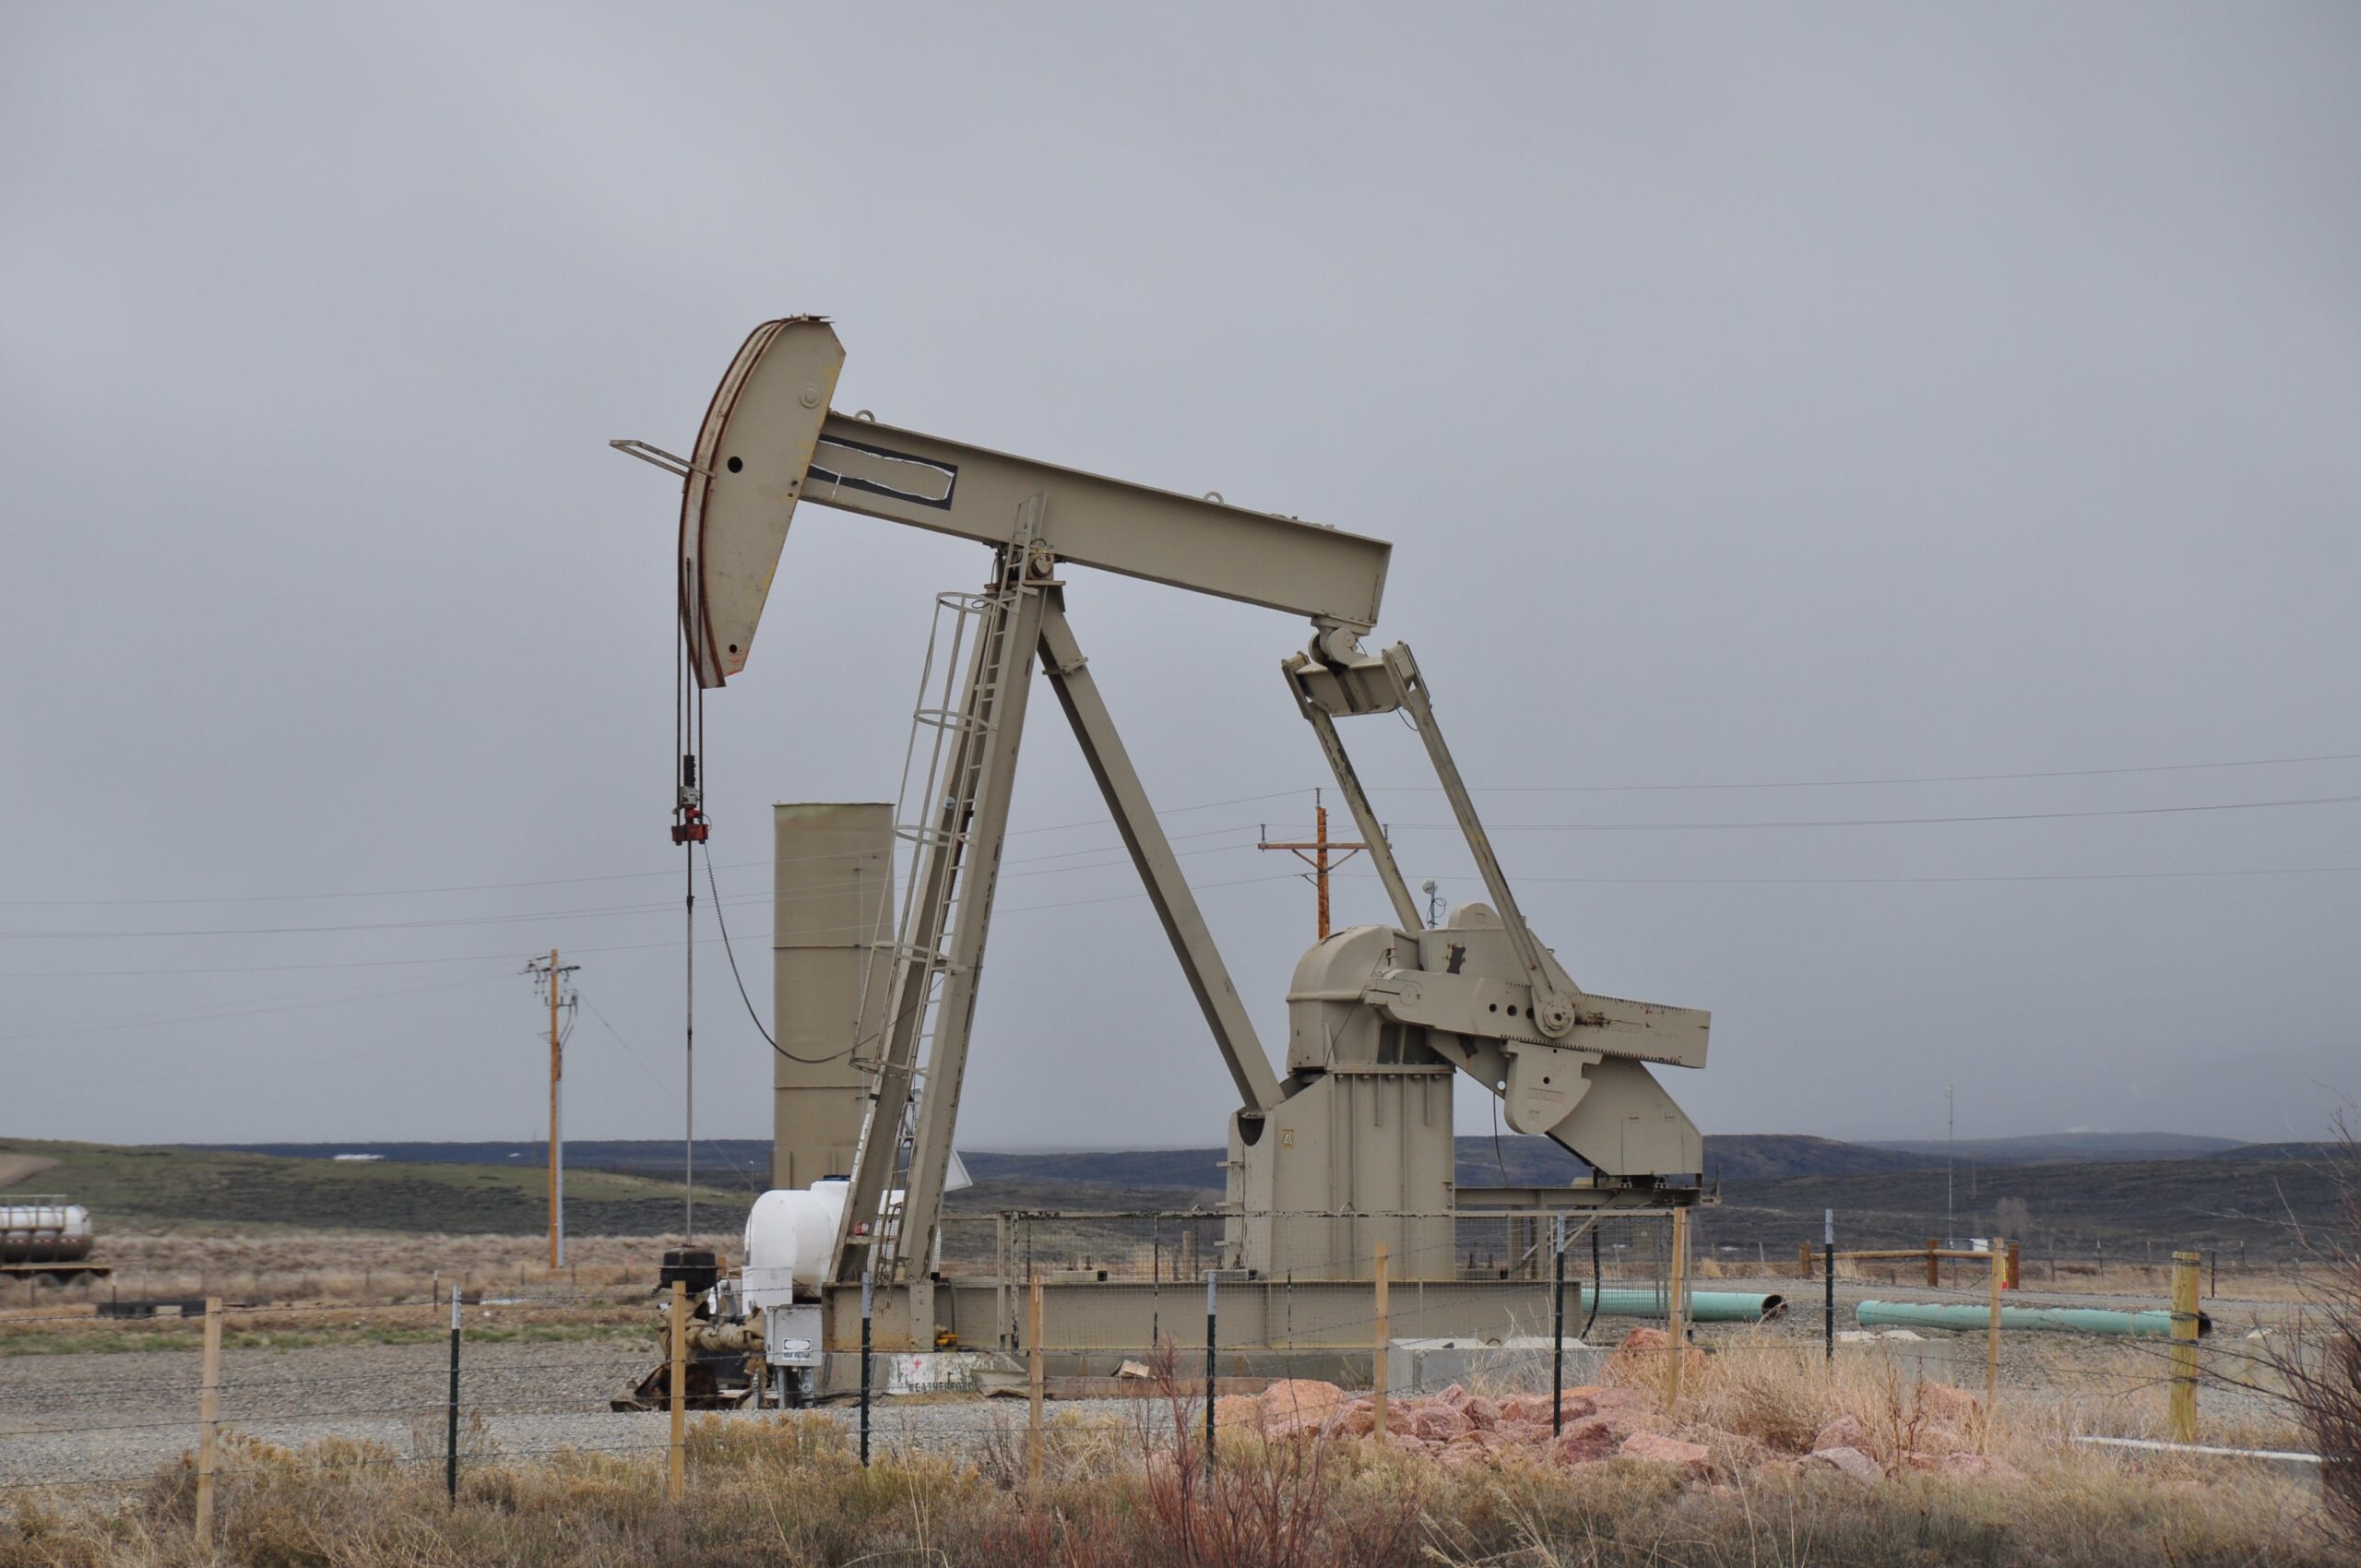 The Importance of Equipment Appraisal in the Oilfield Industry